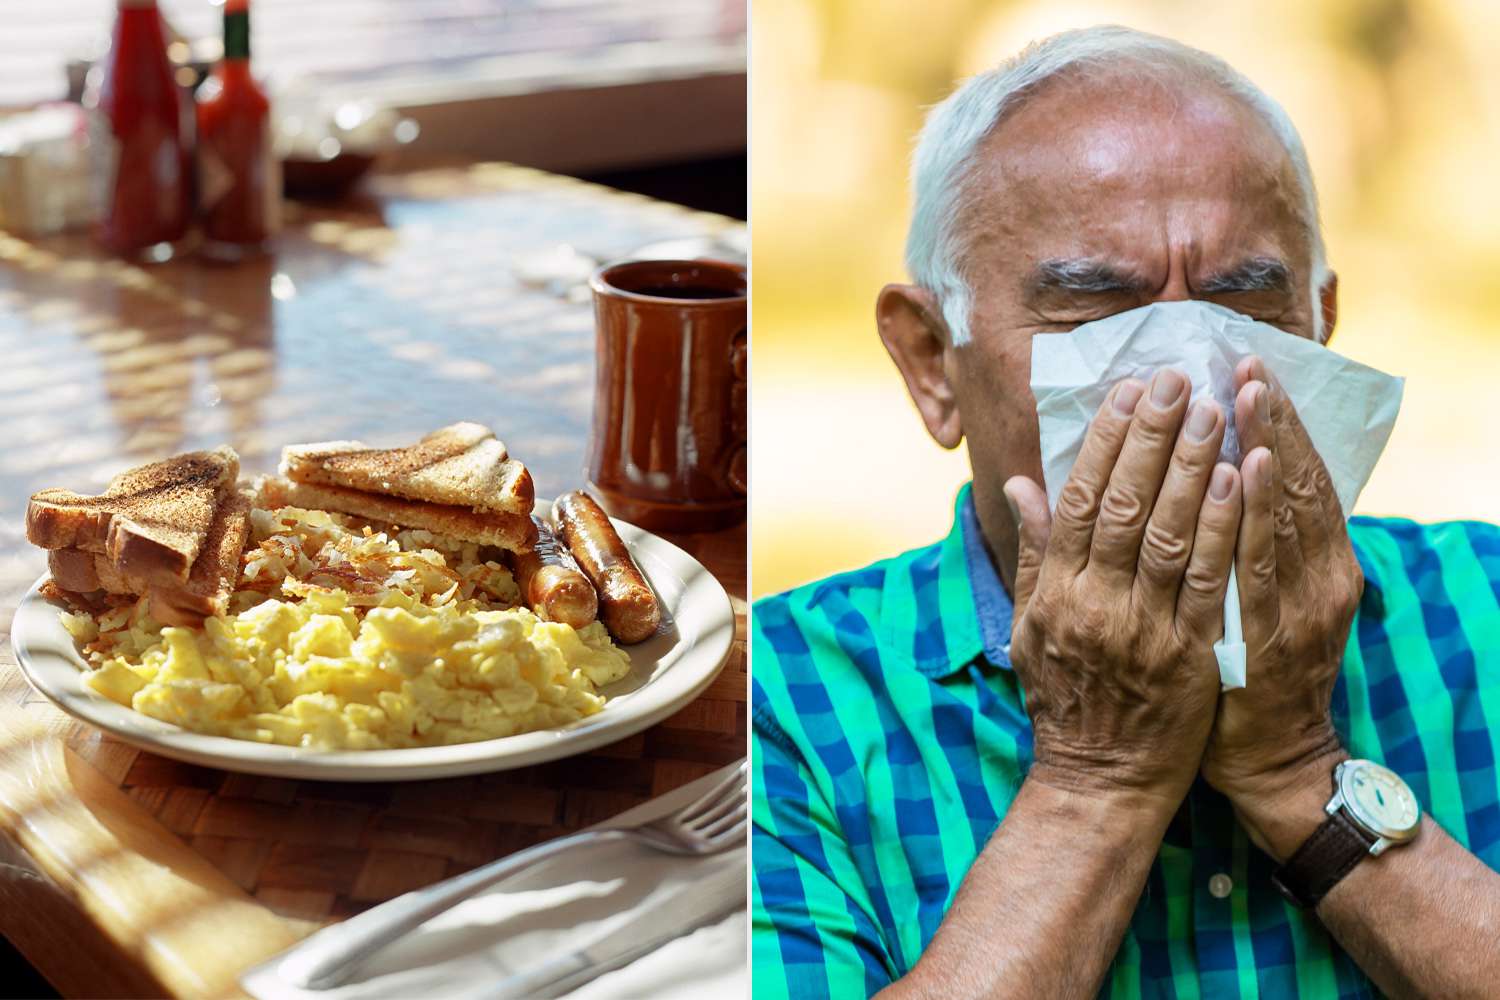 Man Sneezes Out ‘Loops’ of His Large Intestine During Breakfast in Florida Diner